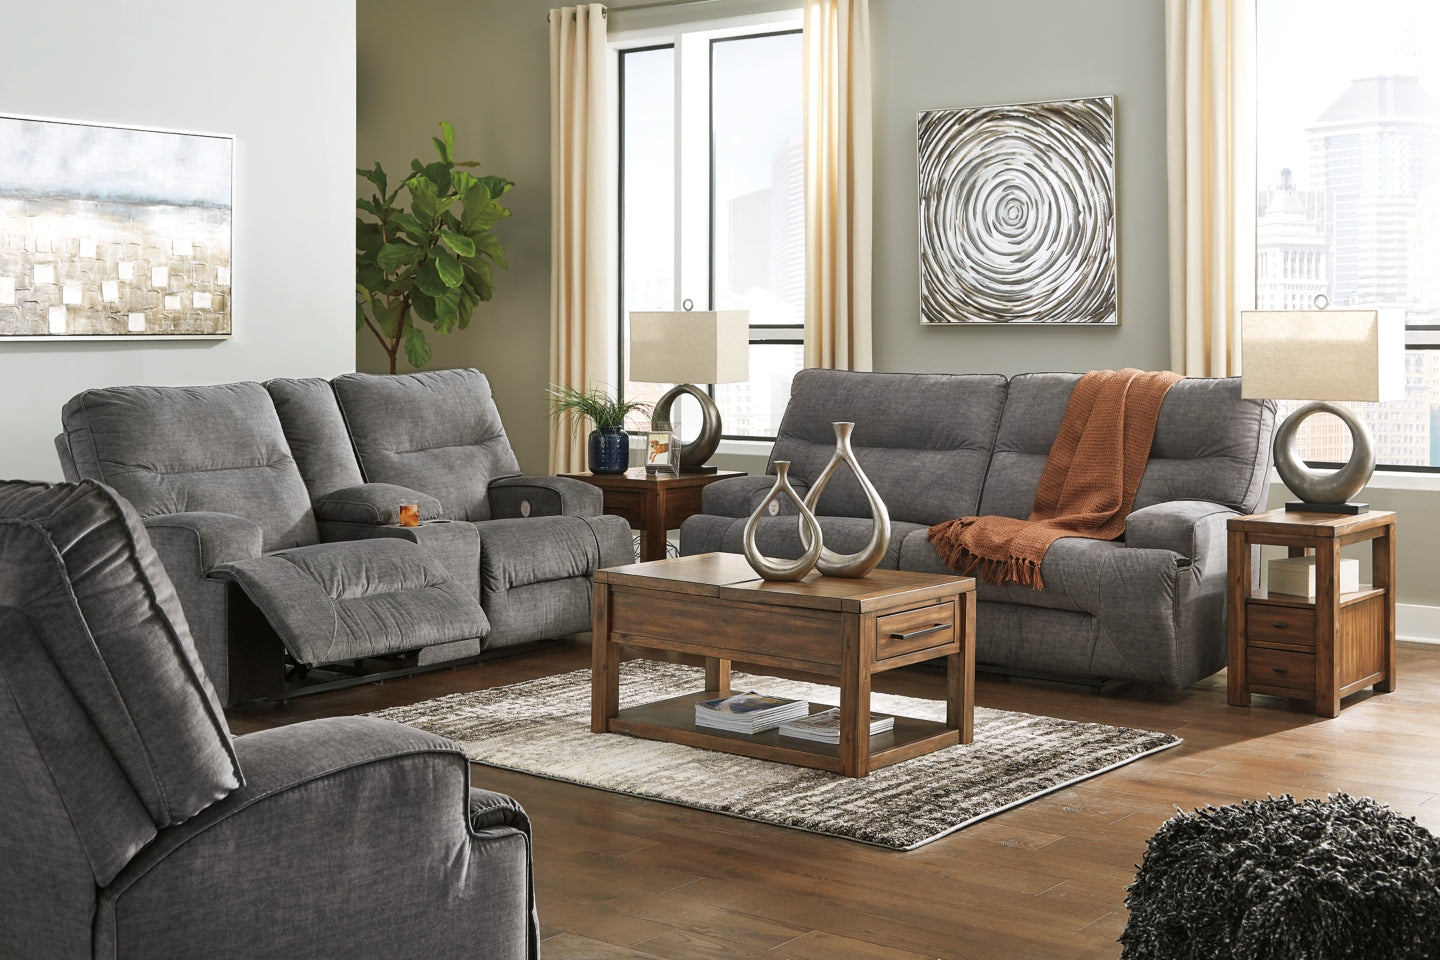 Coombs Sofa, Loveseat and Recliner - PKG001356